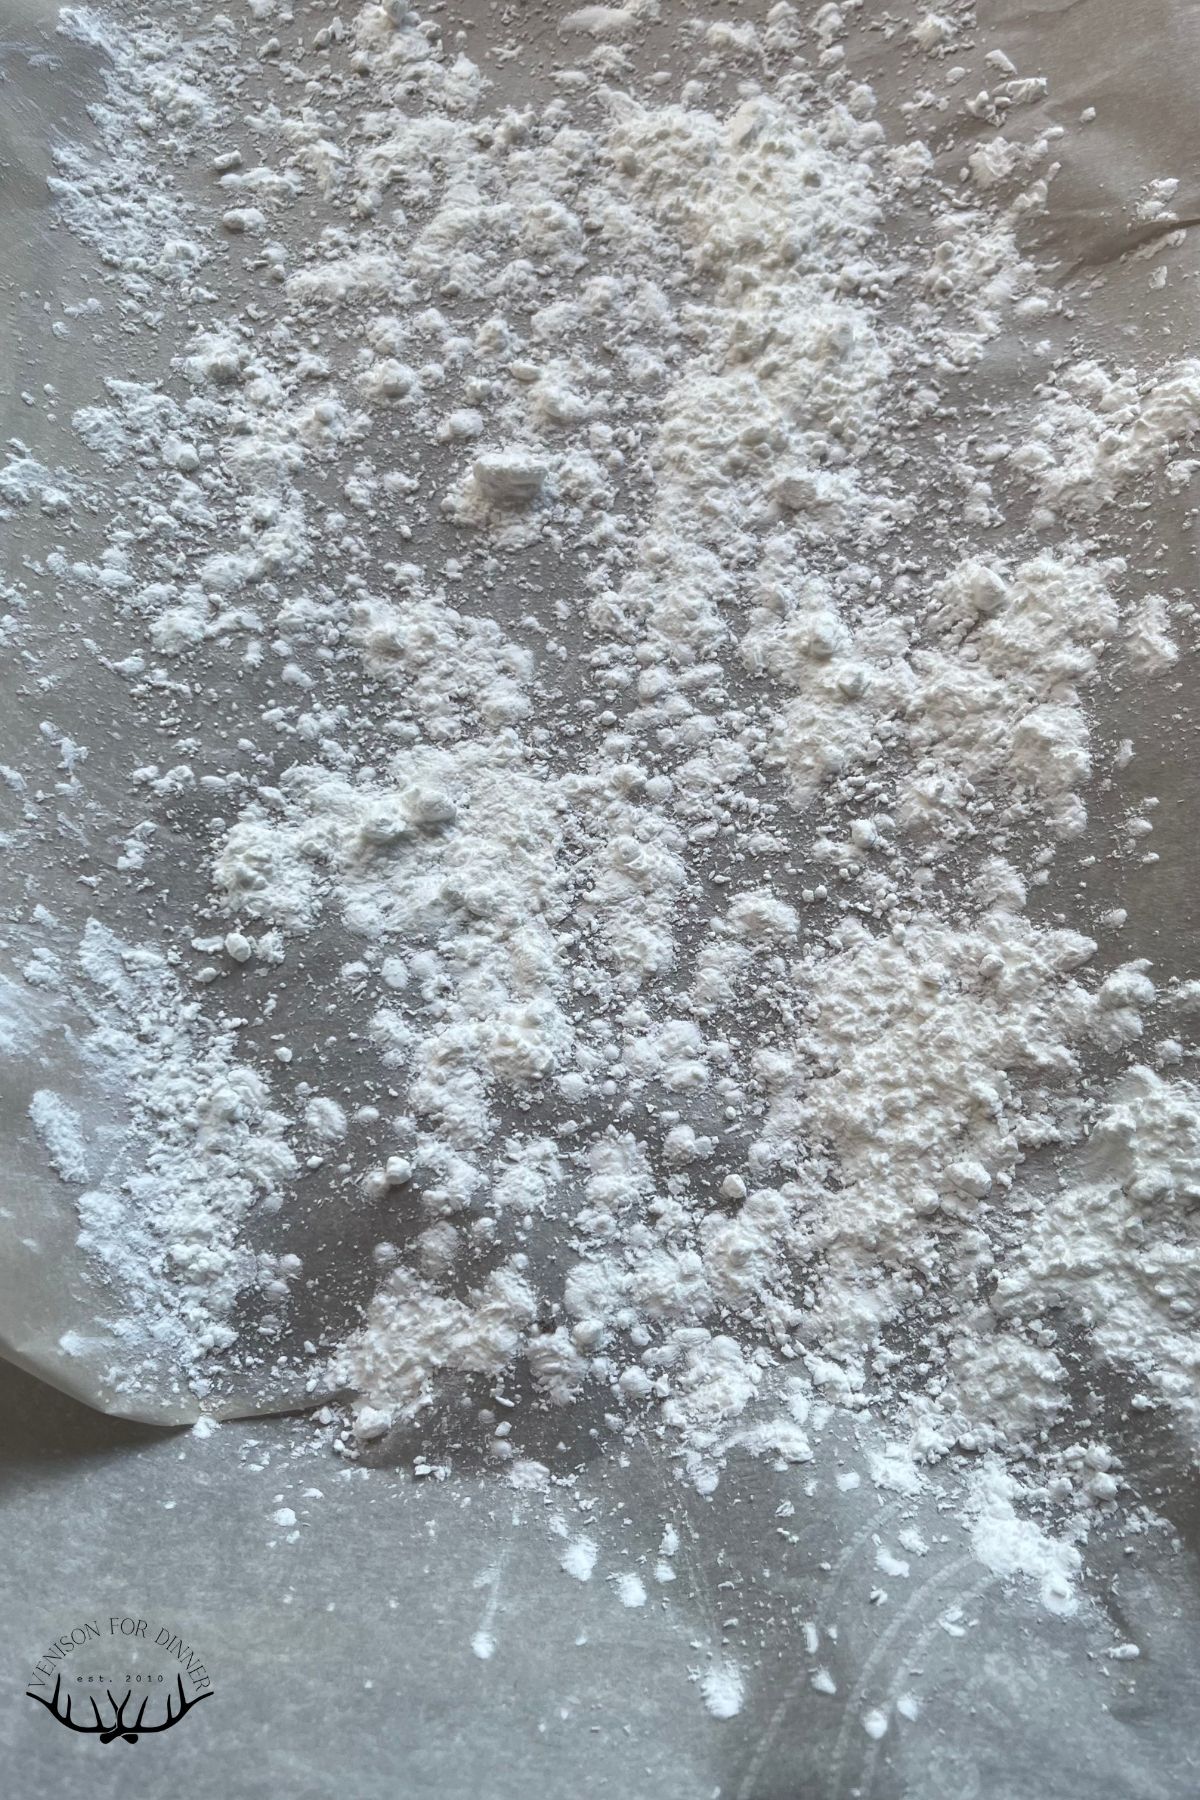 Powdered sugar sprinkled on a counter.